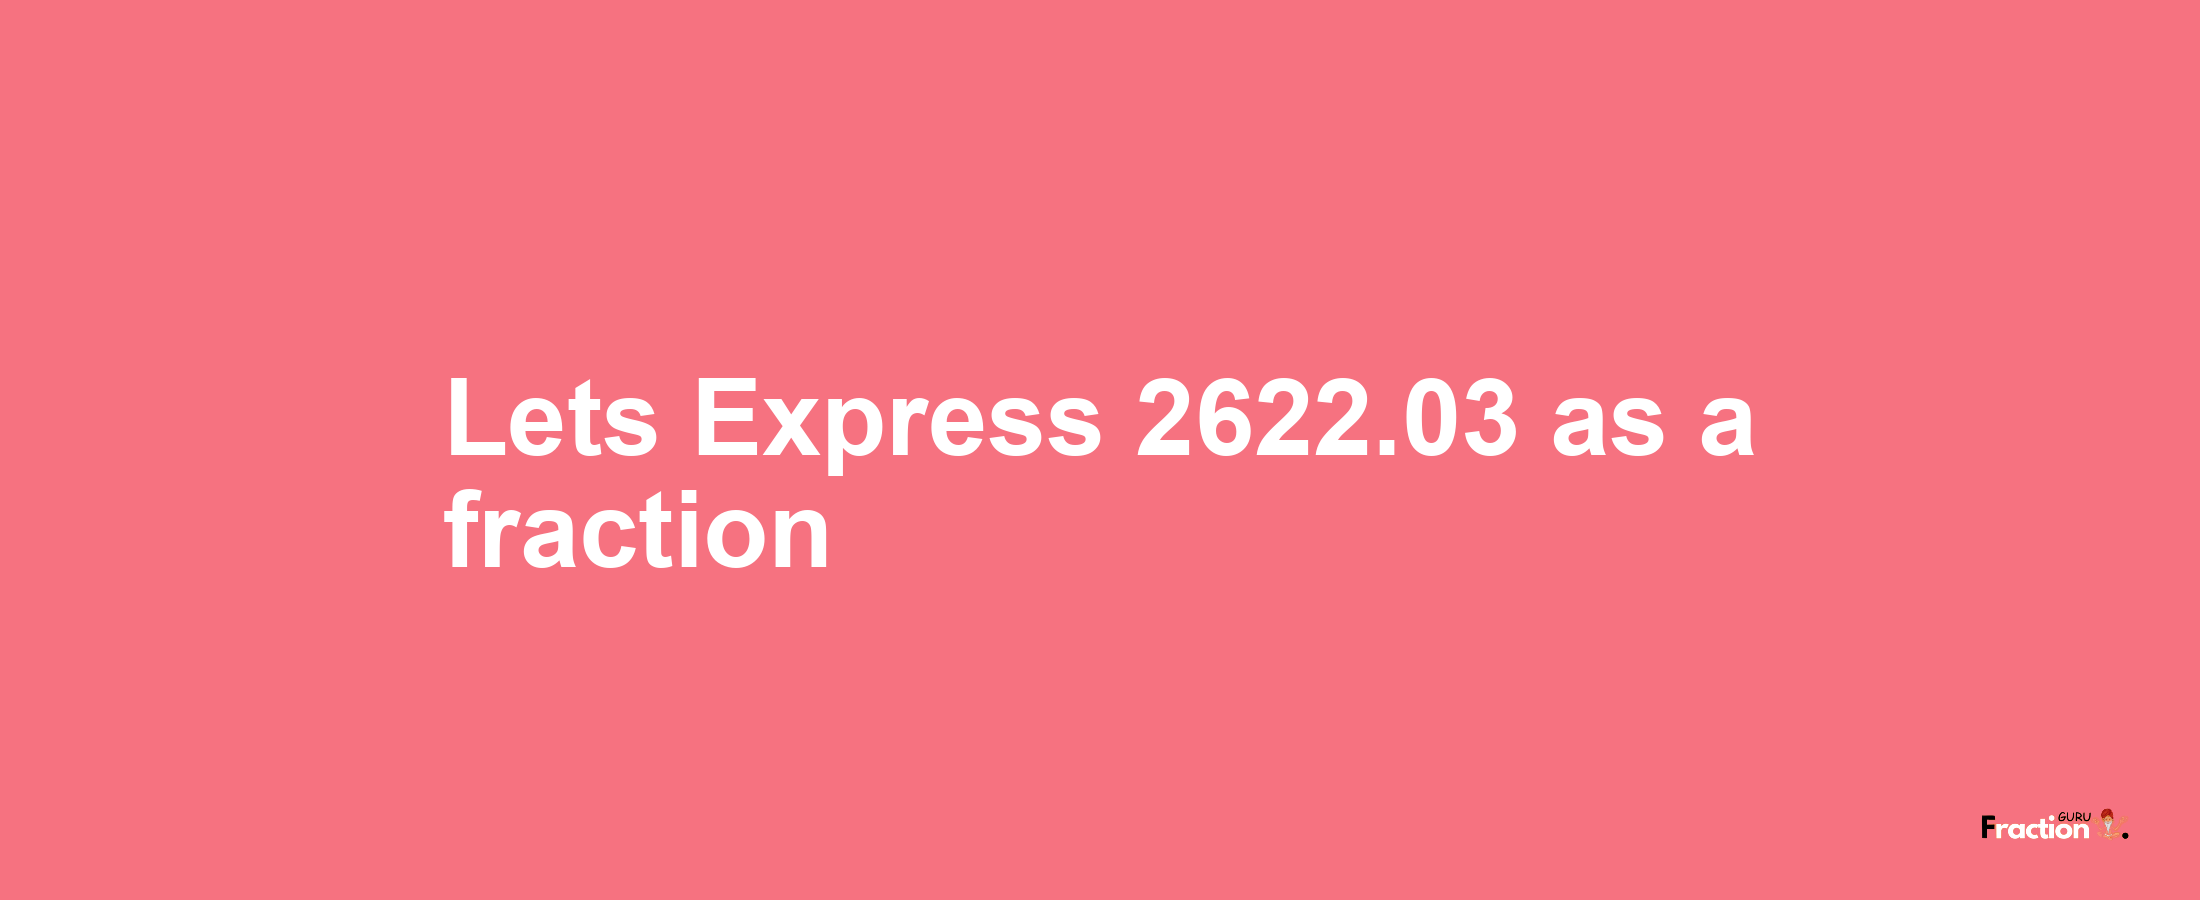 Lets Express 2622.03 as afraction